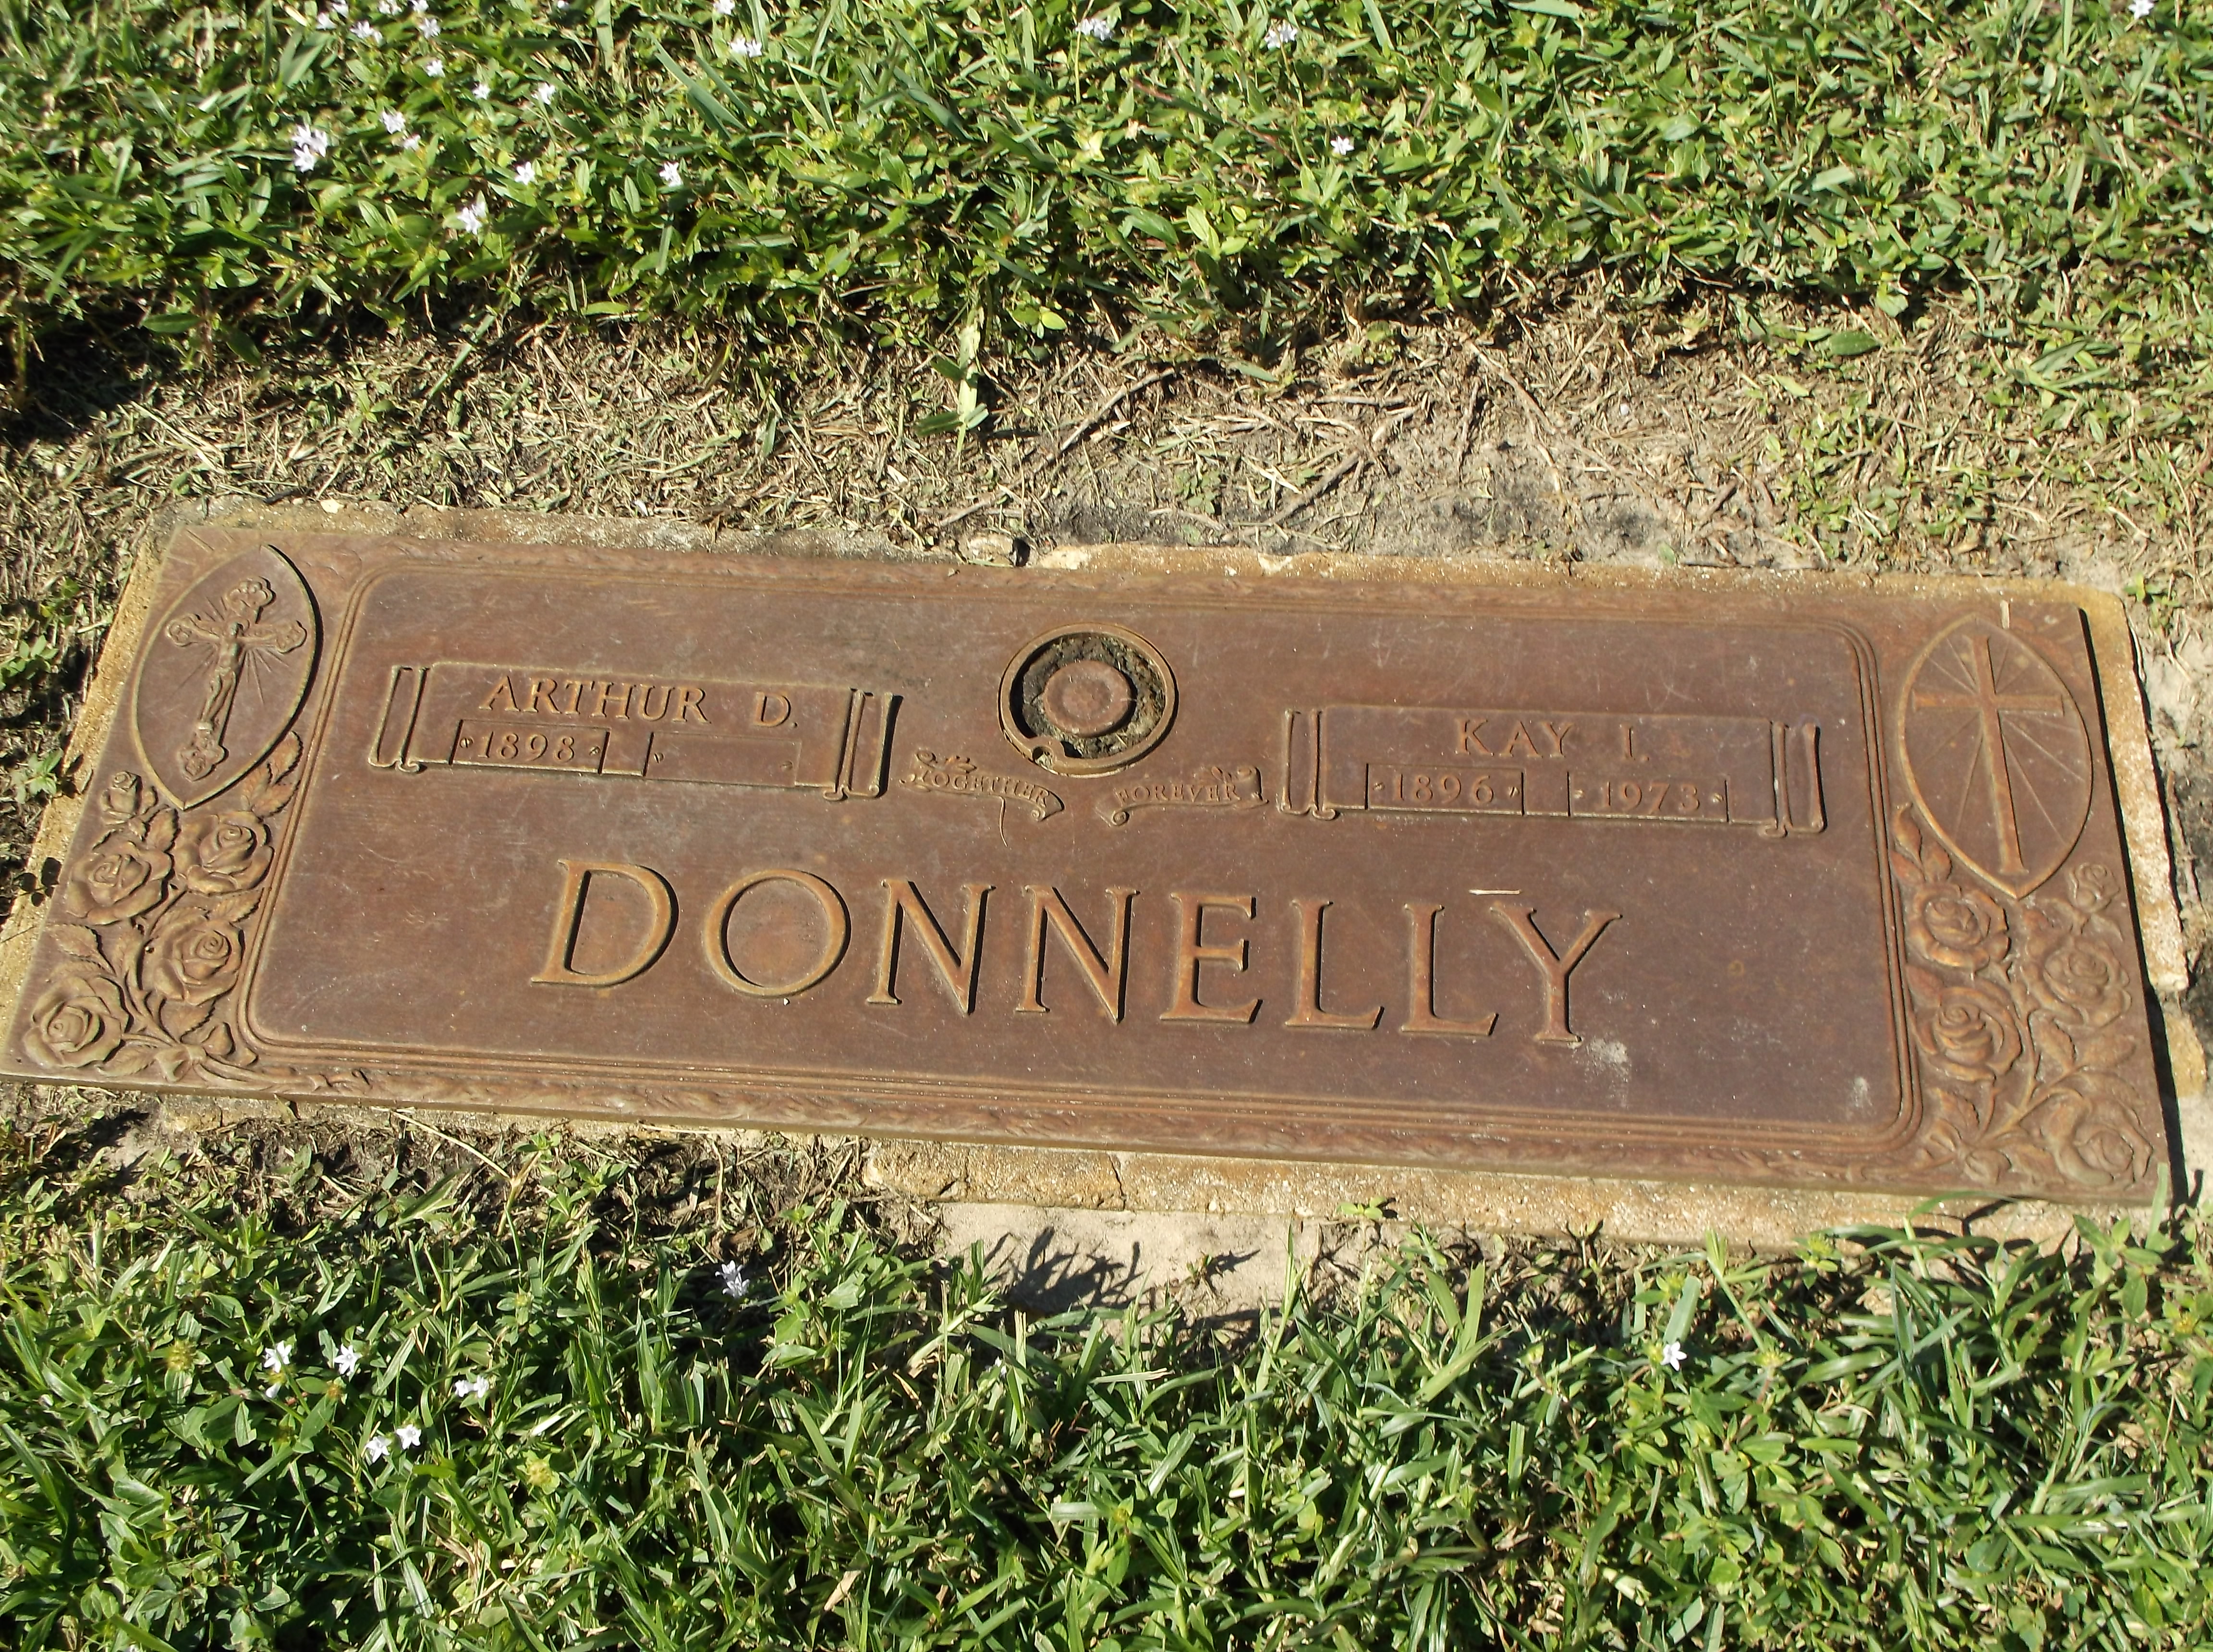 Kay I Donnelly